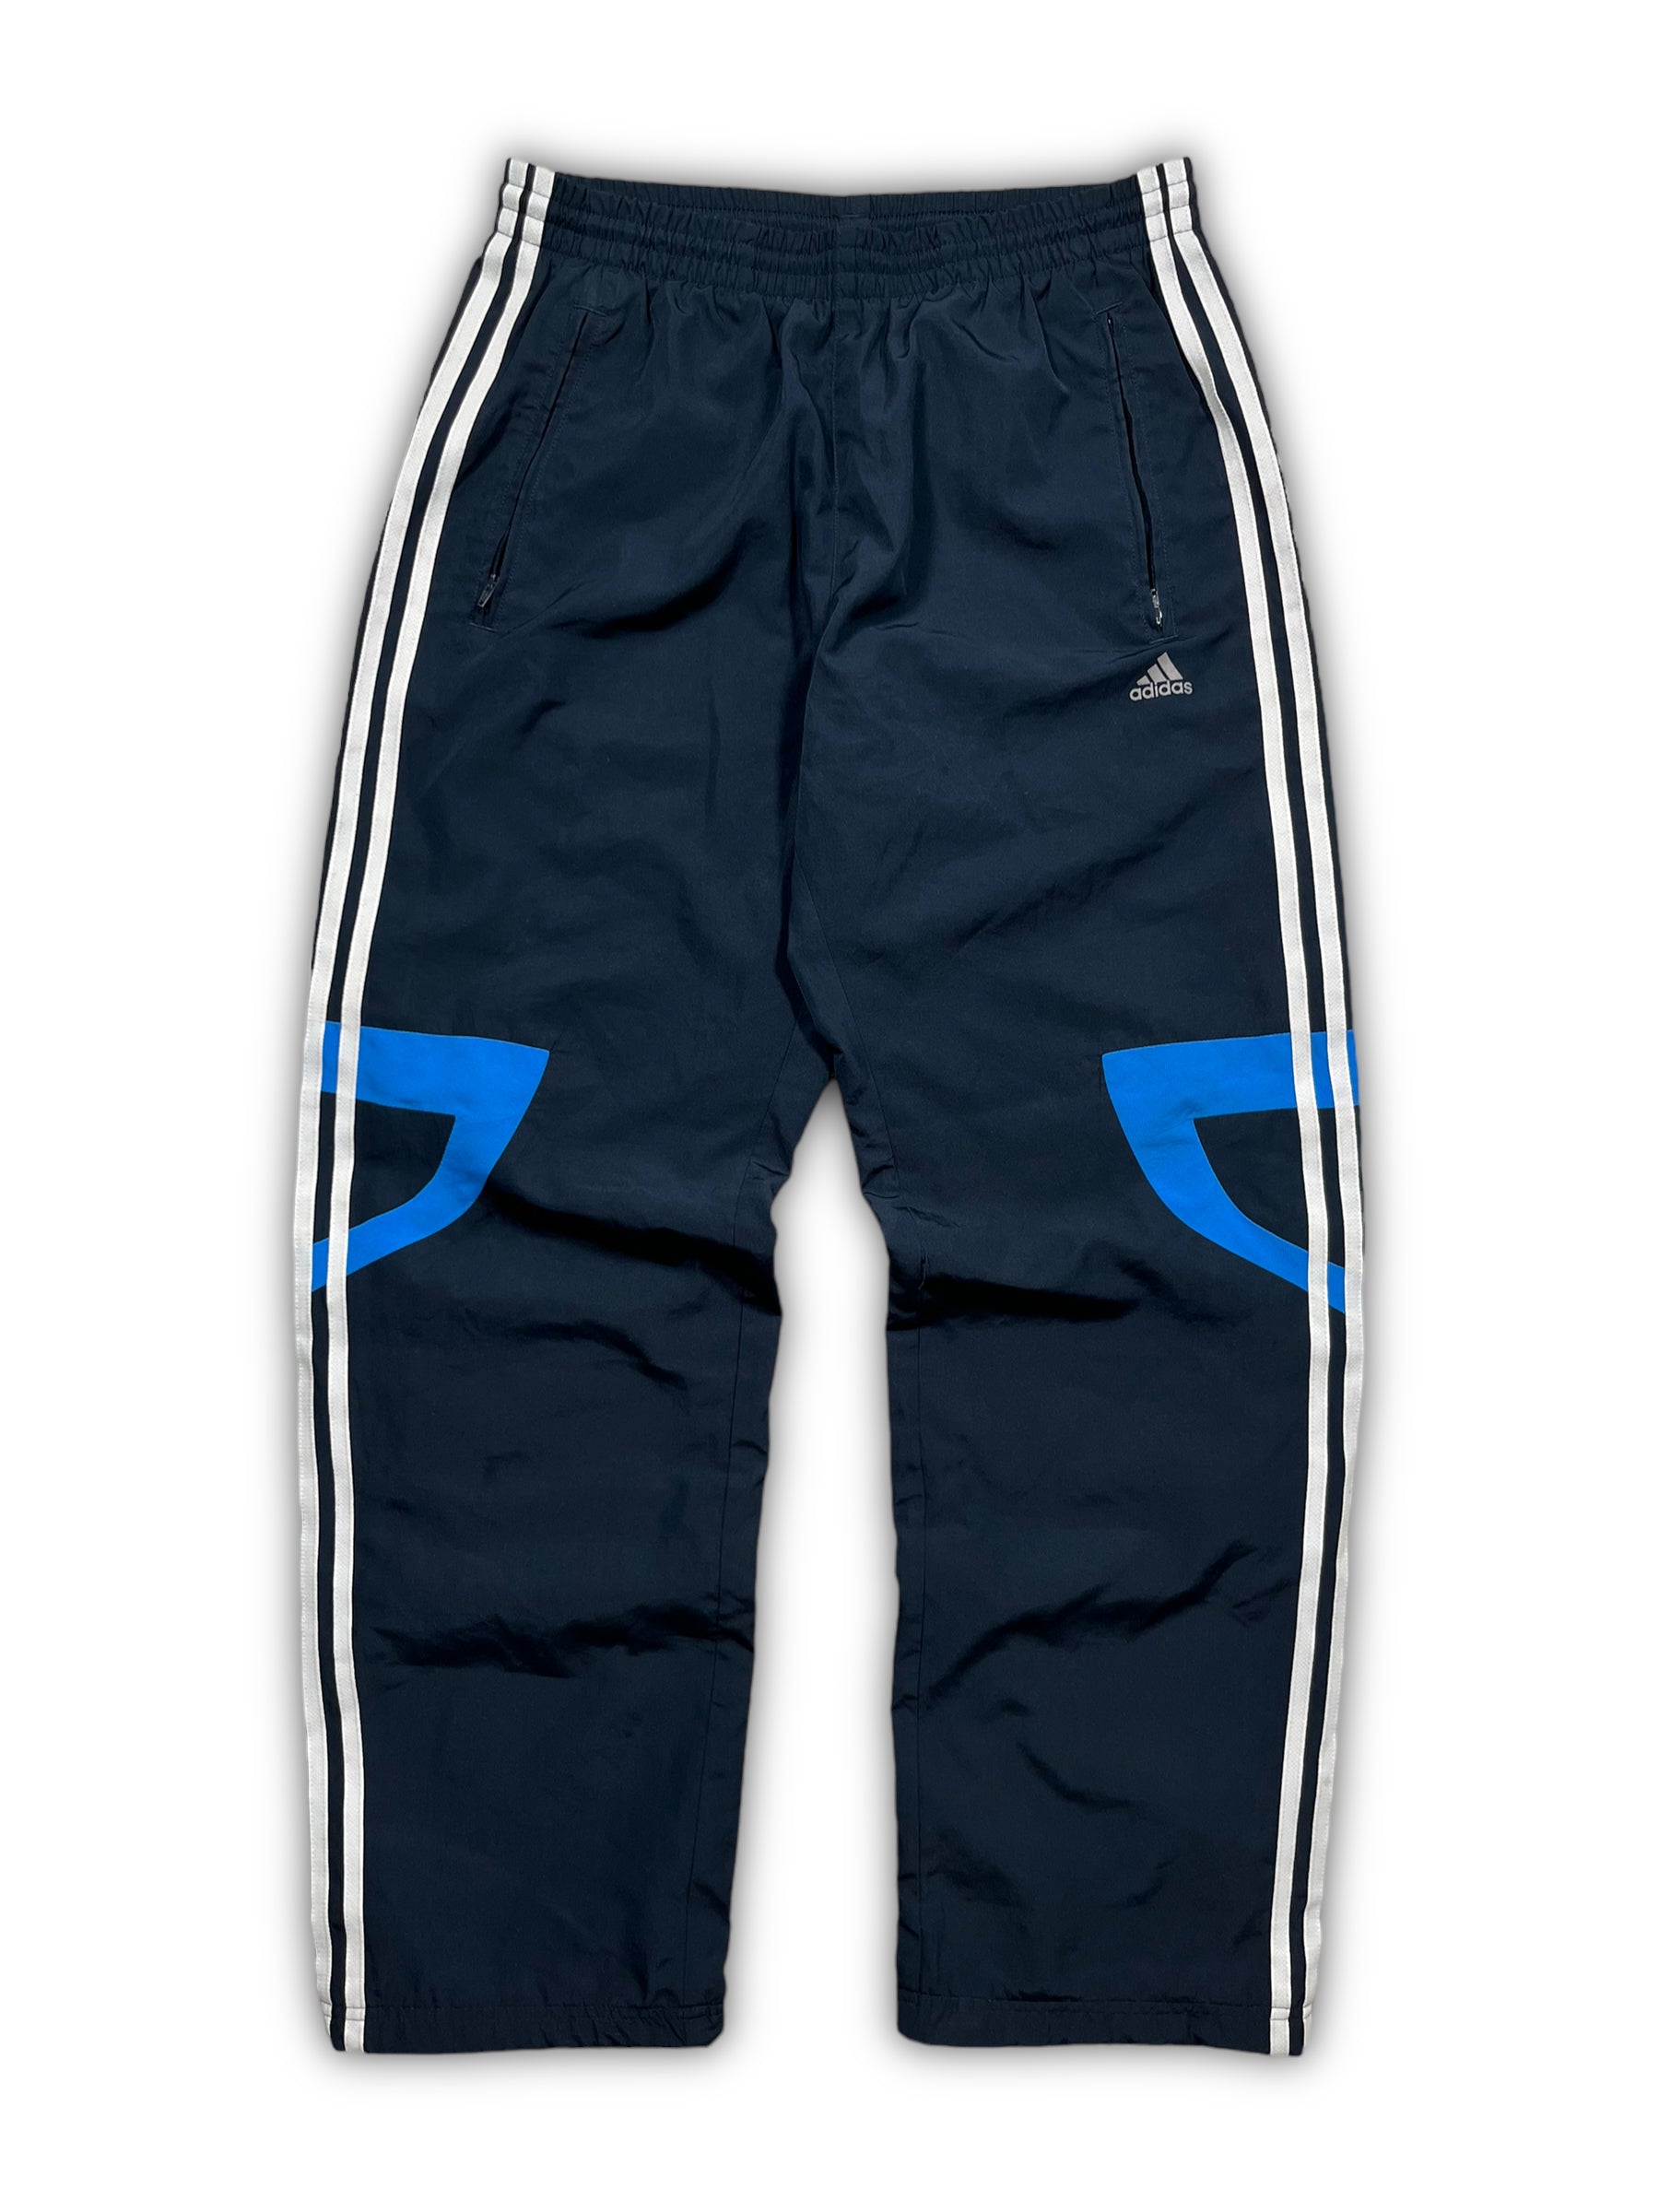 90s Adidas Track Pants (XS) – Major League Thrifts